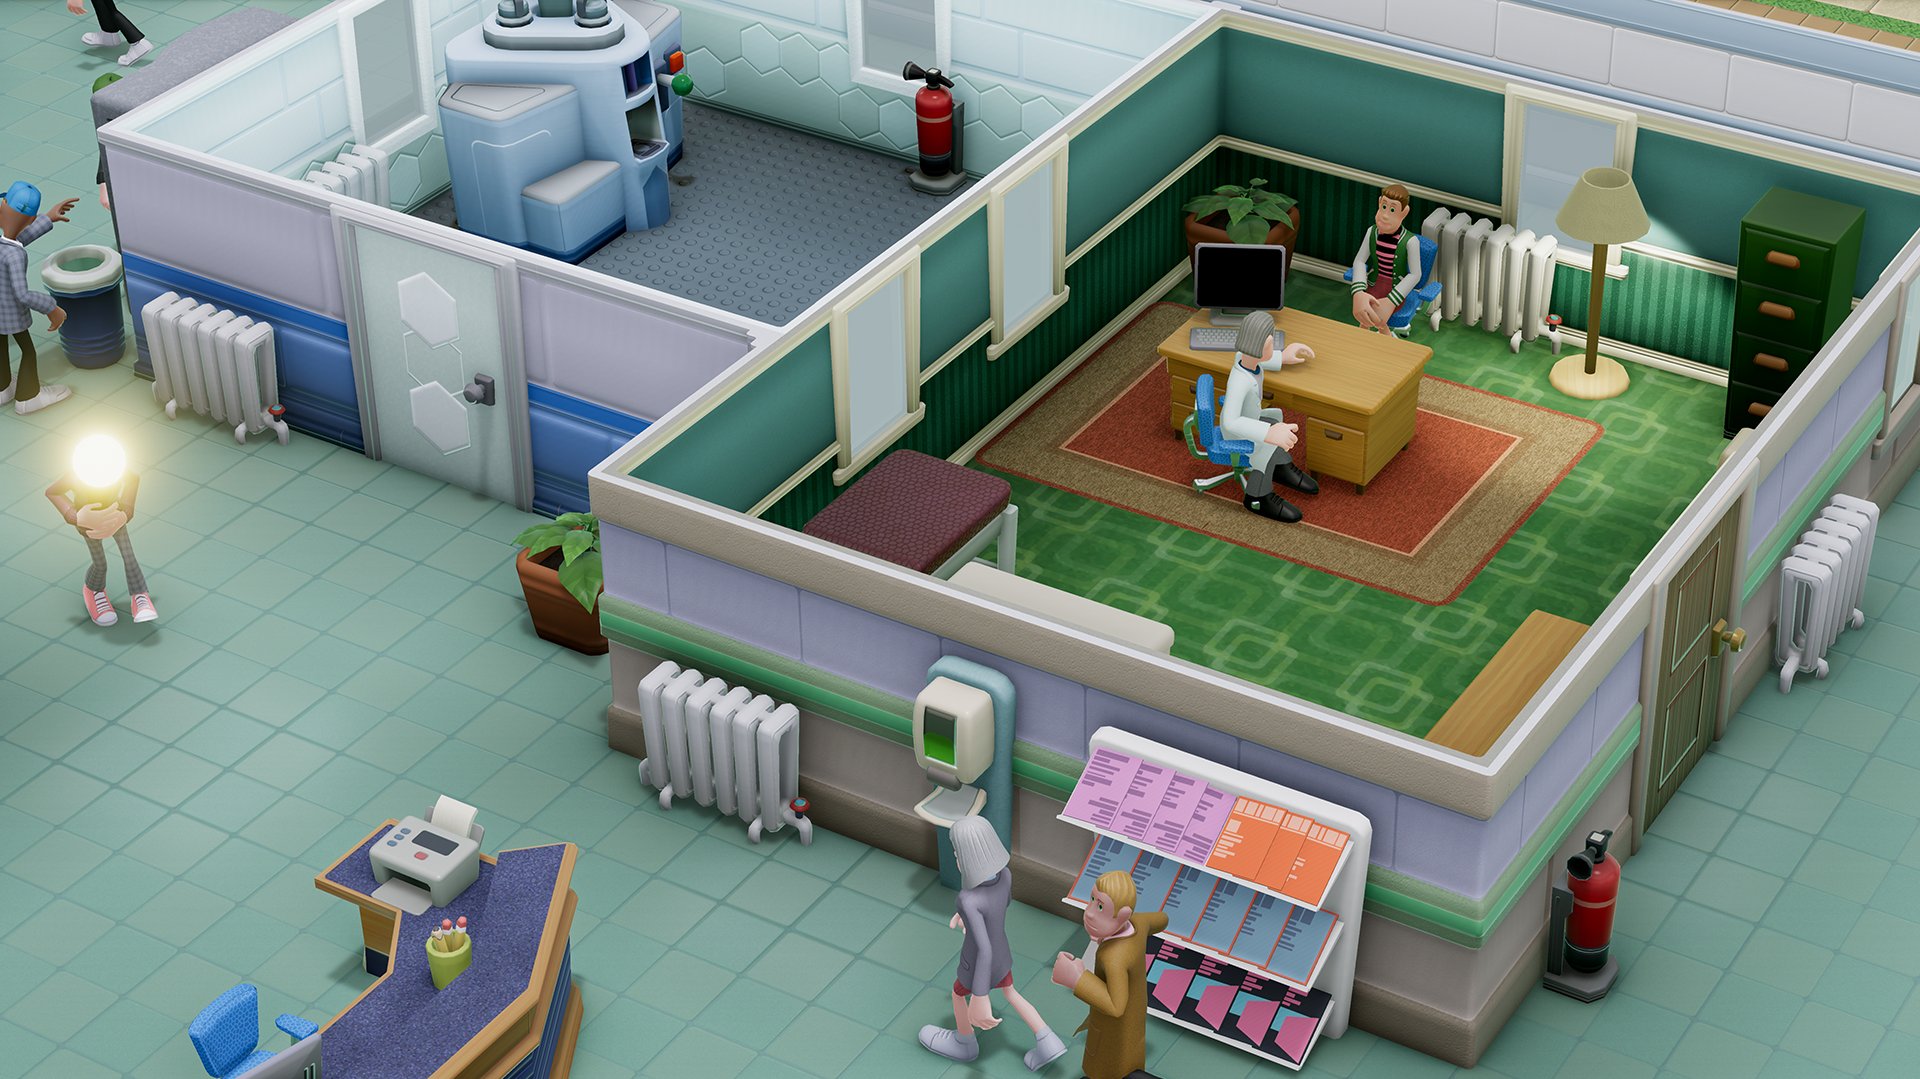 one point hospital download